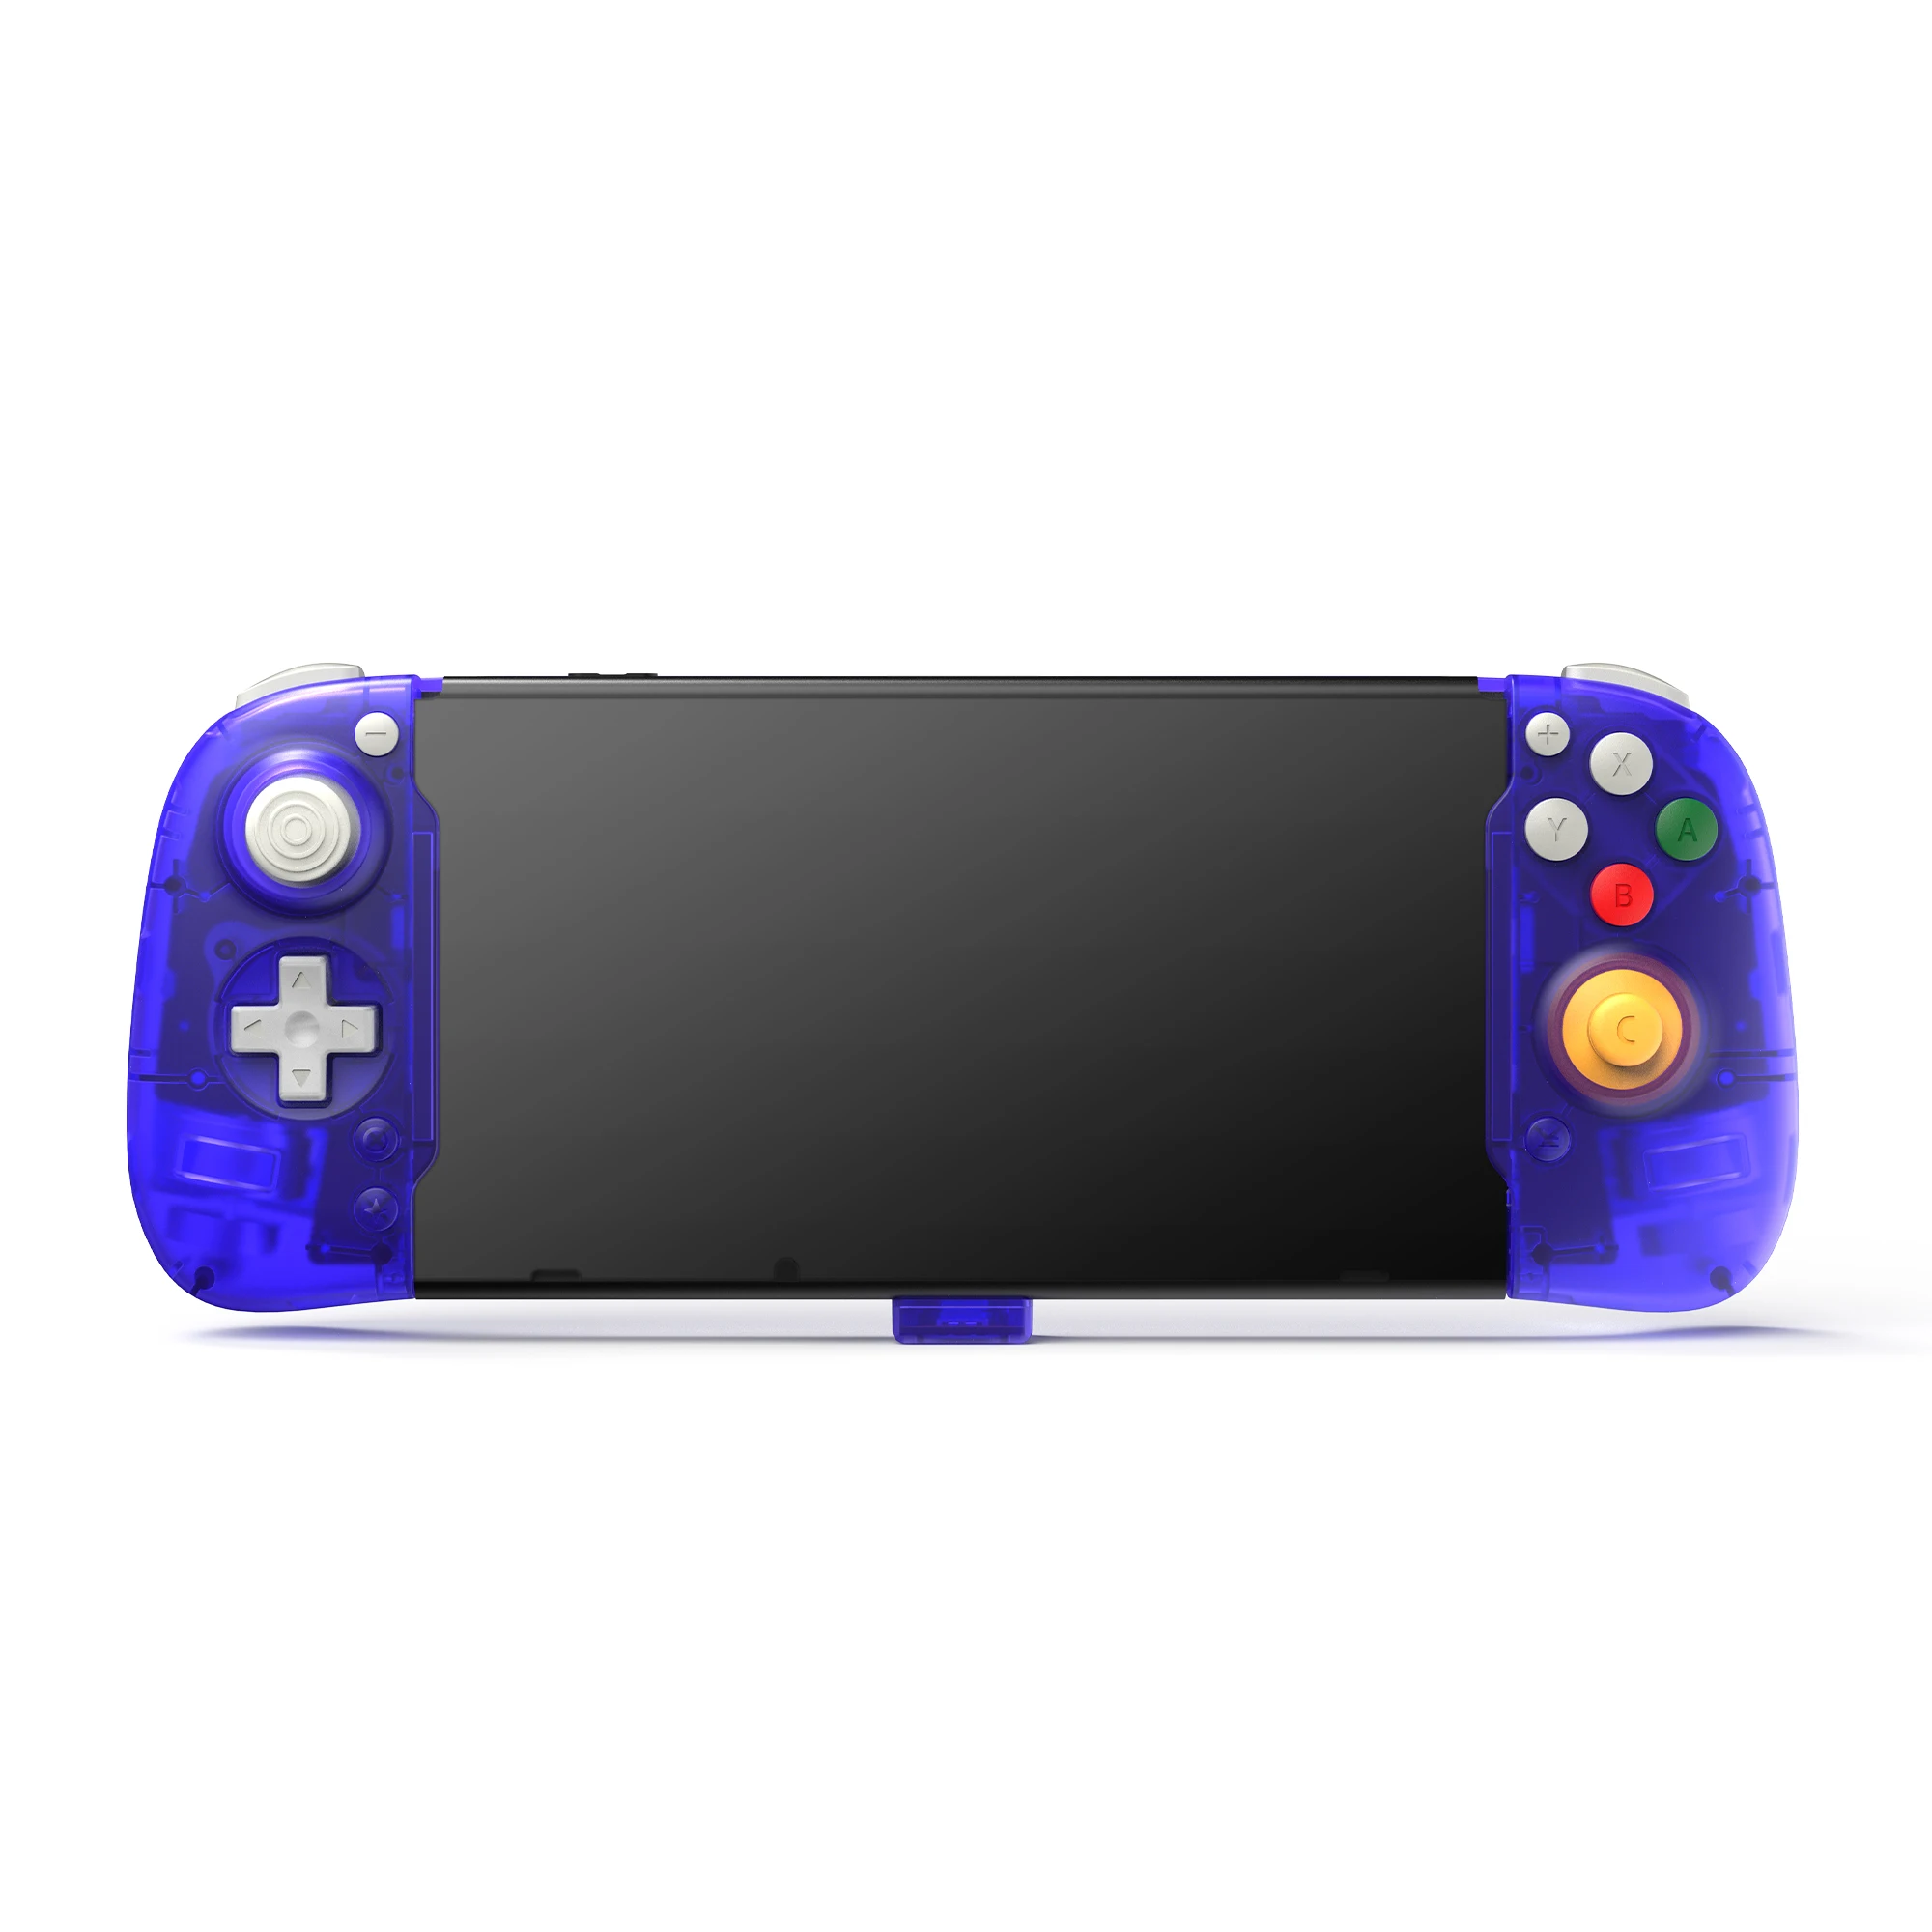 

Retroflag Handheld Controller Gamepad With Hall Sensor Joystick For Nintendo Switch / Switch OLED NS Console Game Handle